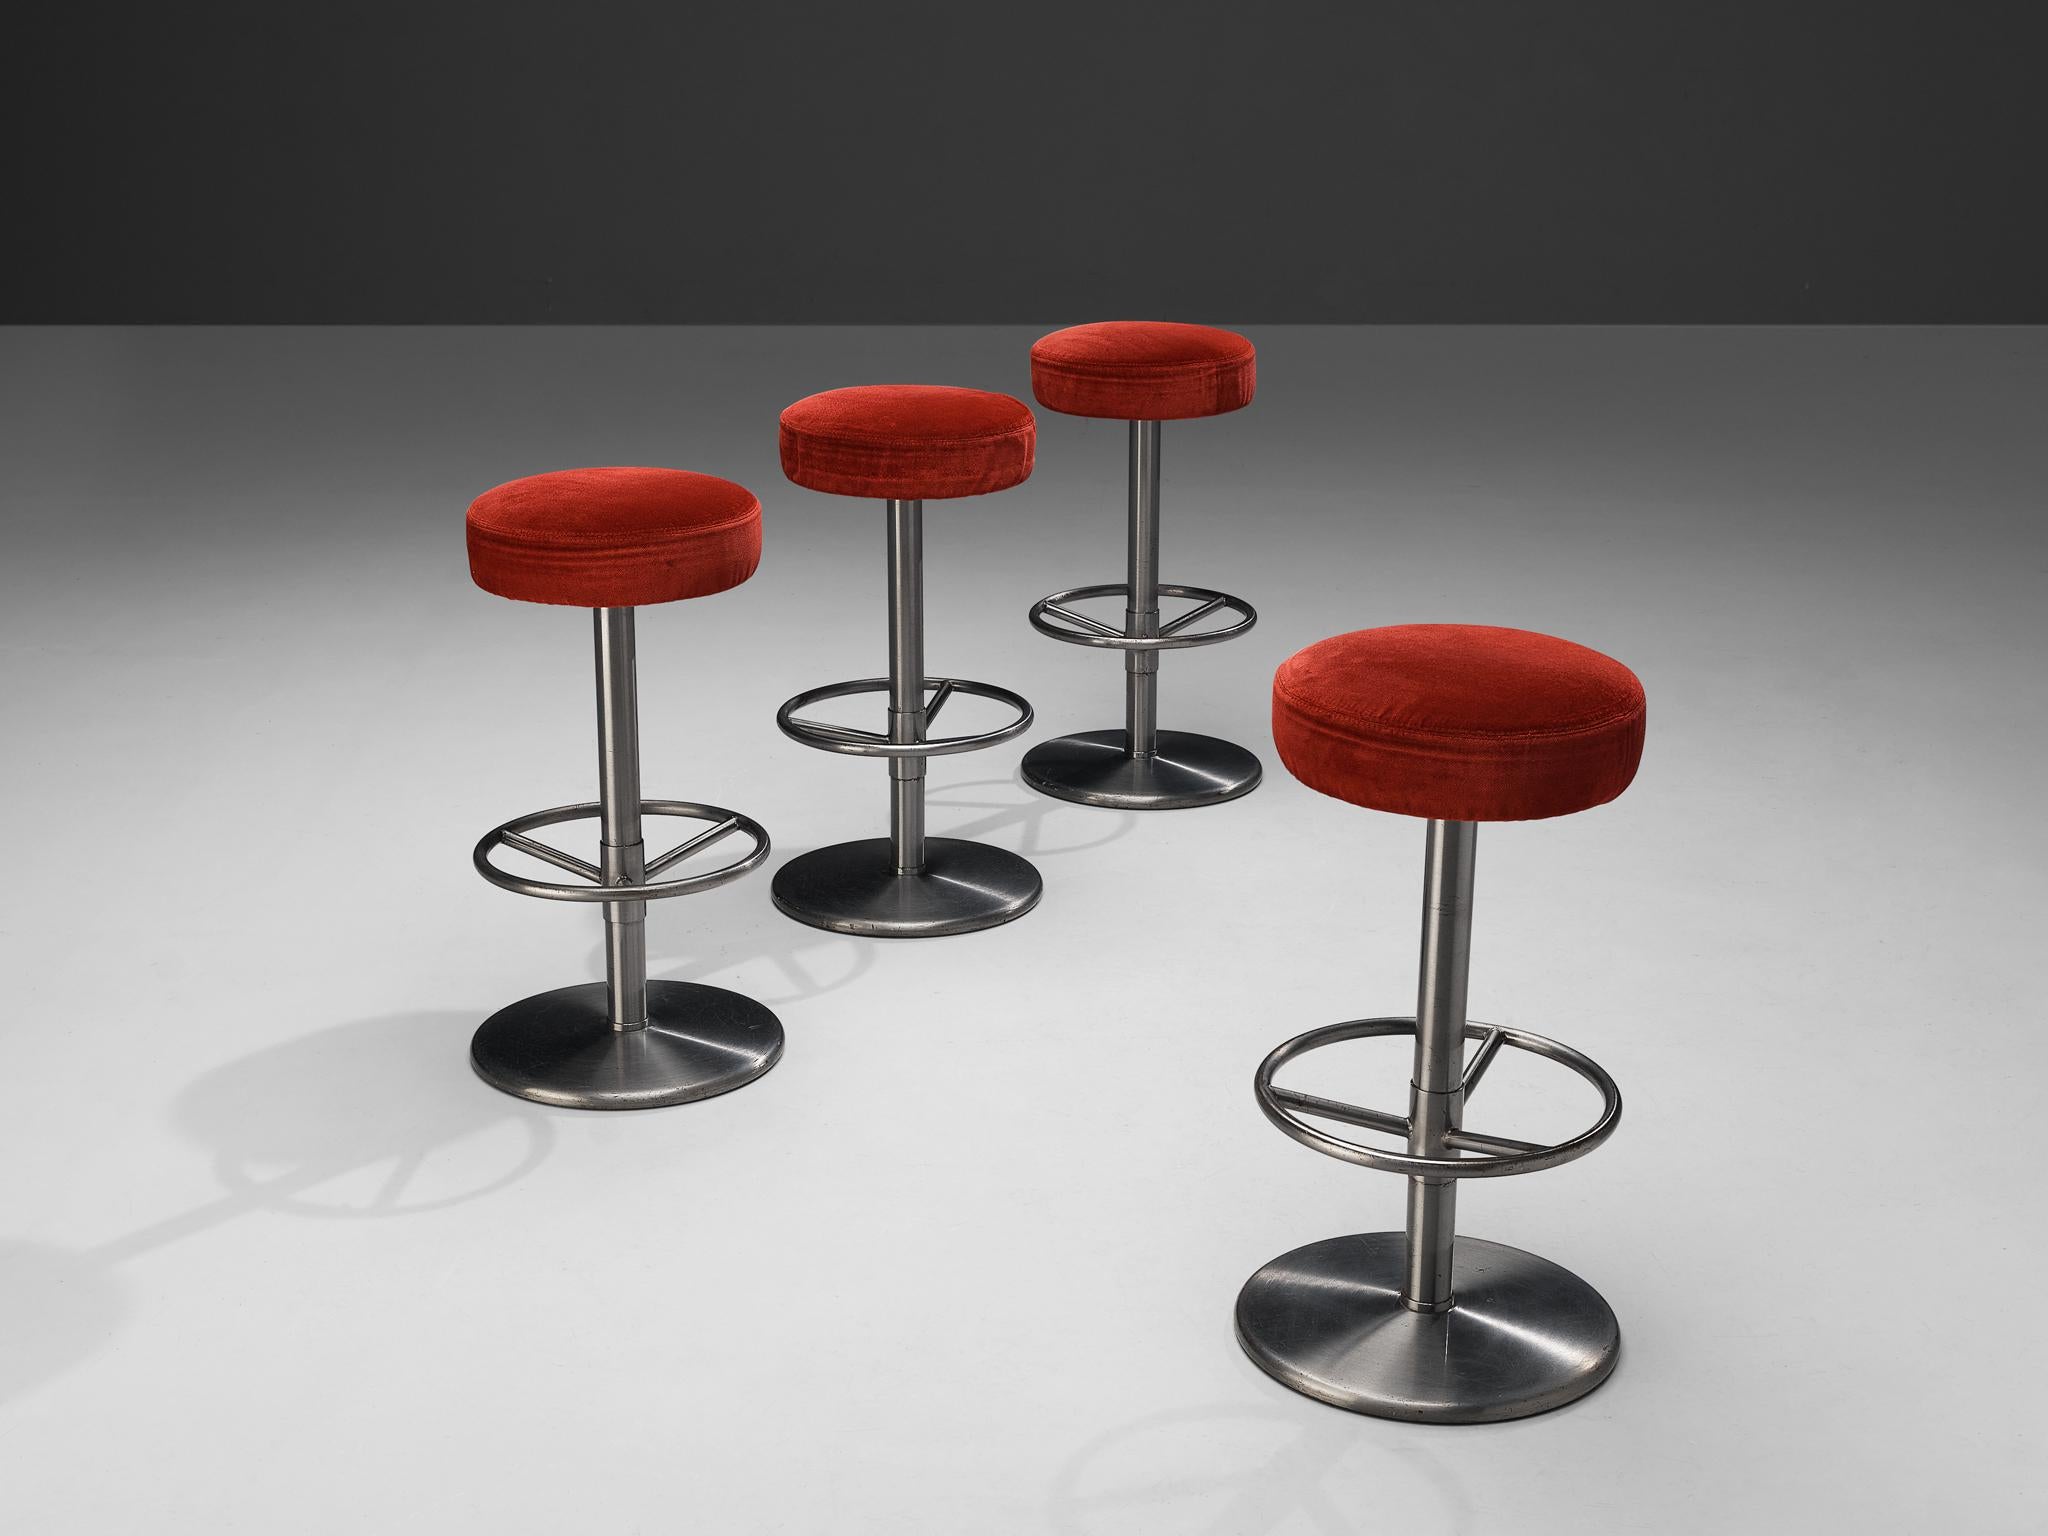 Börje Johanson for Johanson Design, set of four bar stools as part of the 'classic' series, chromed metal, velvet, Sweden, 1960s

Highly comfortable high barstools in red velvet upholstery. Due to the soft seat and back, these chairs provide a very